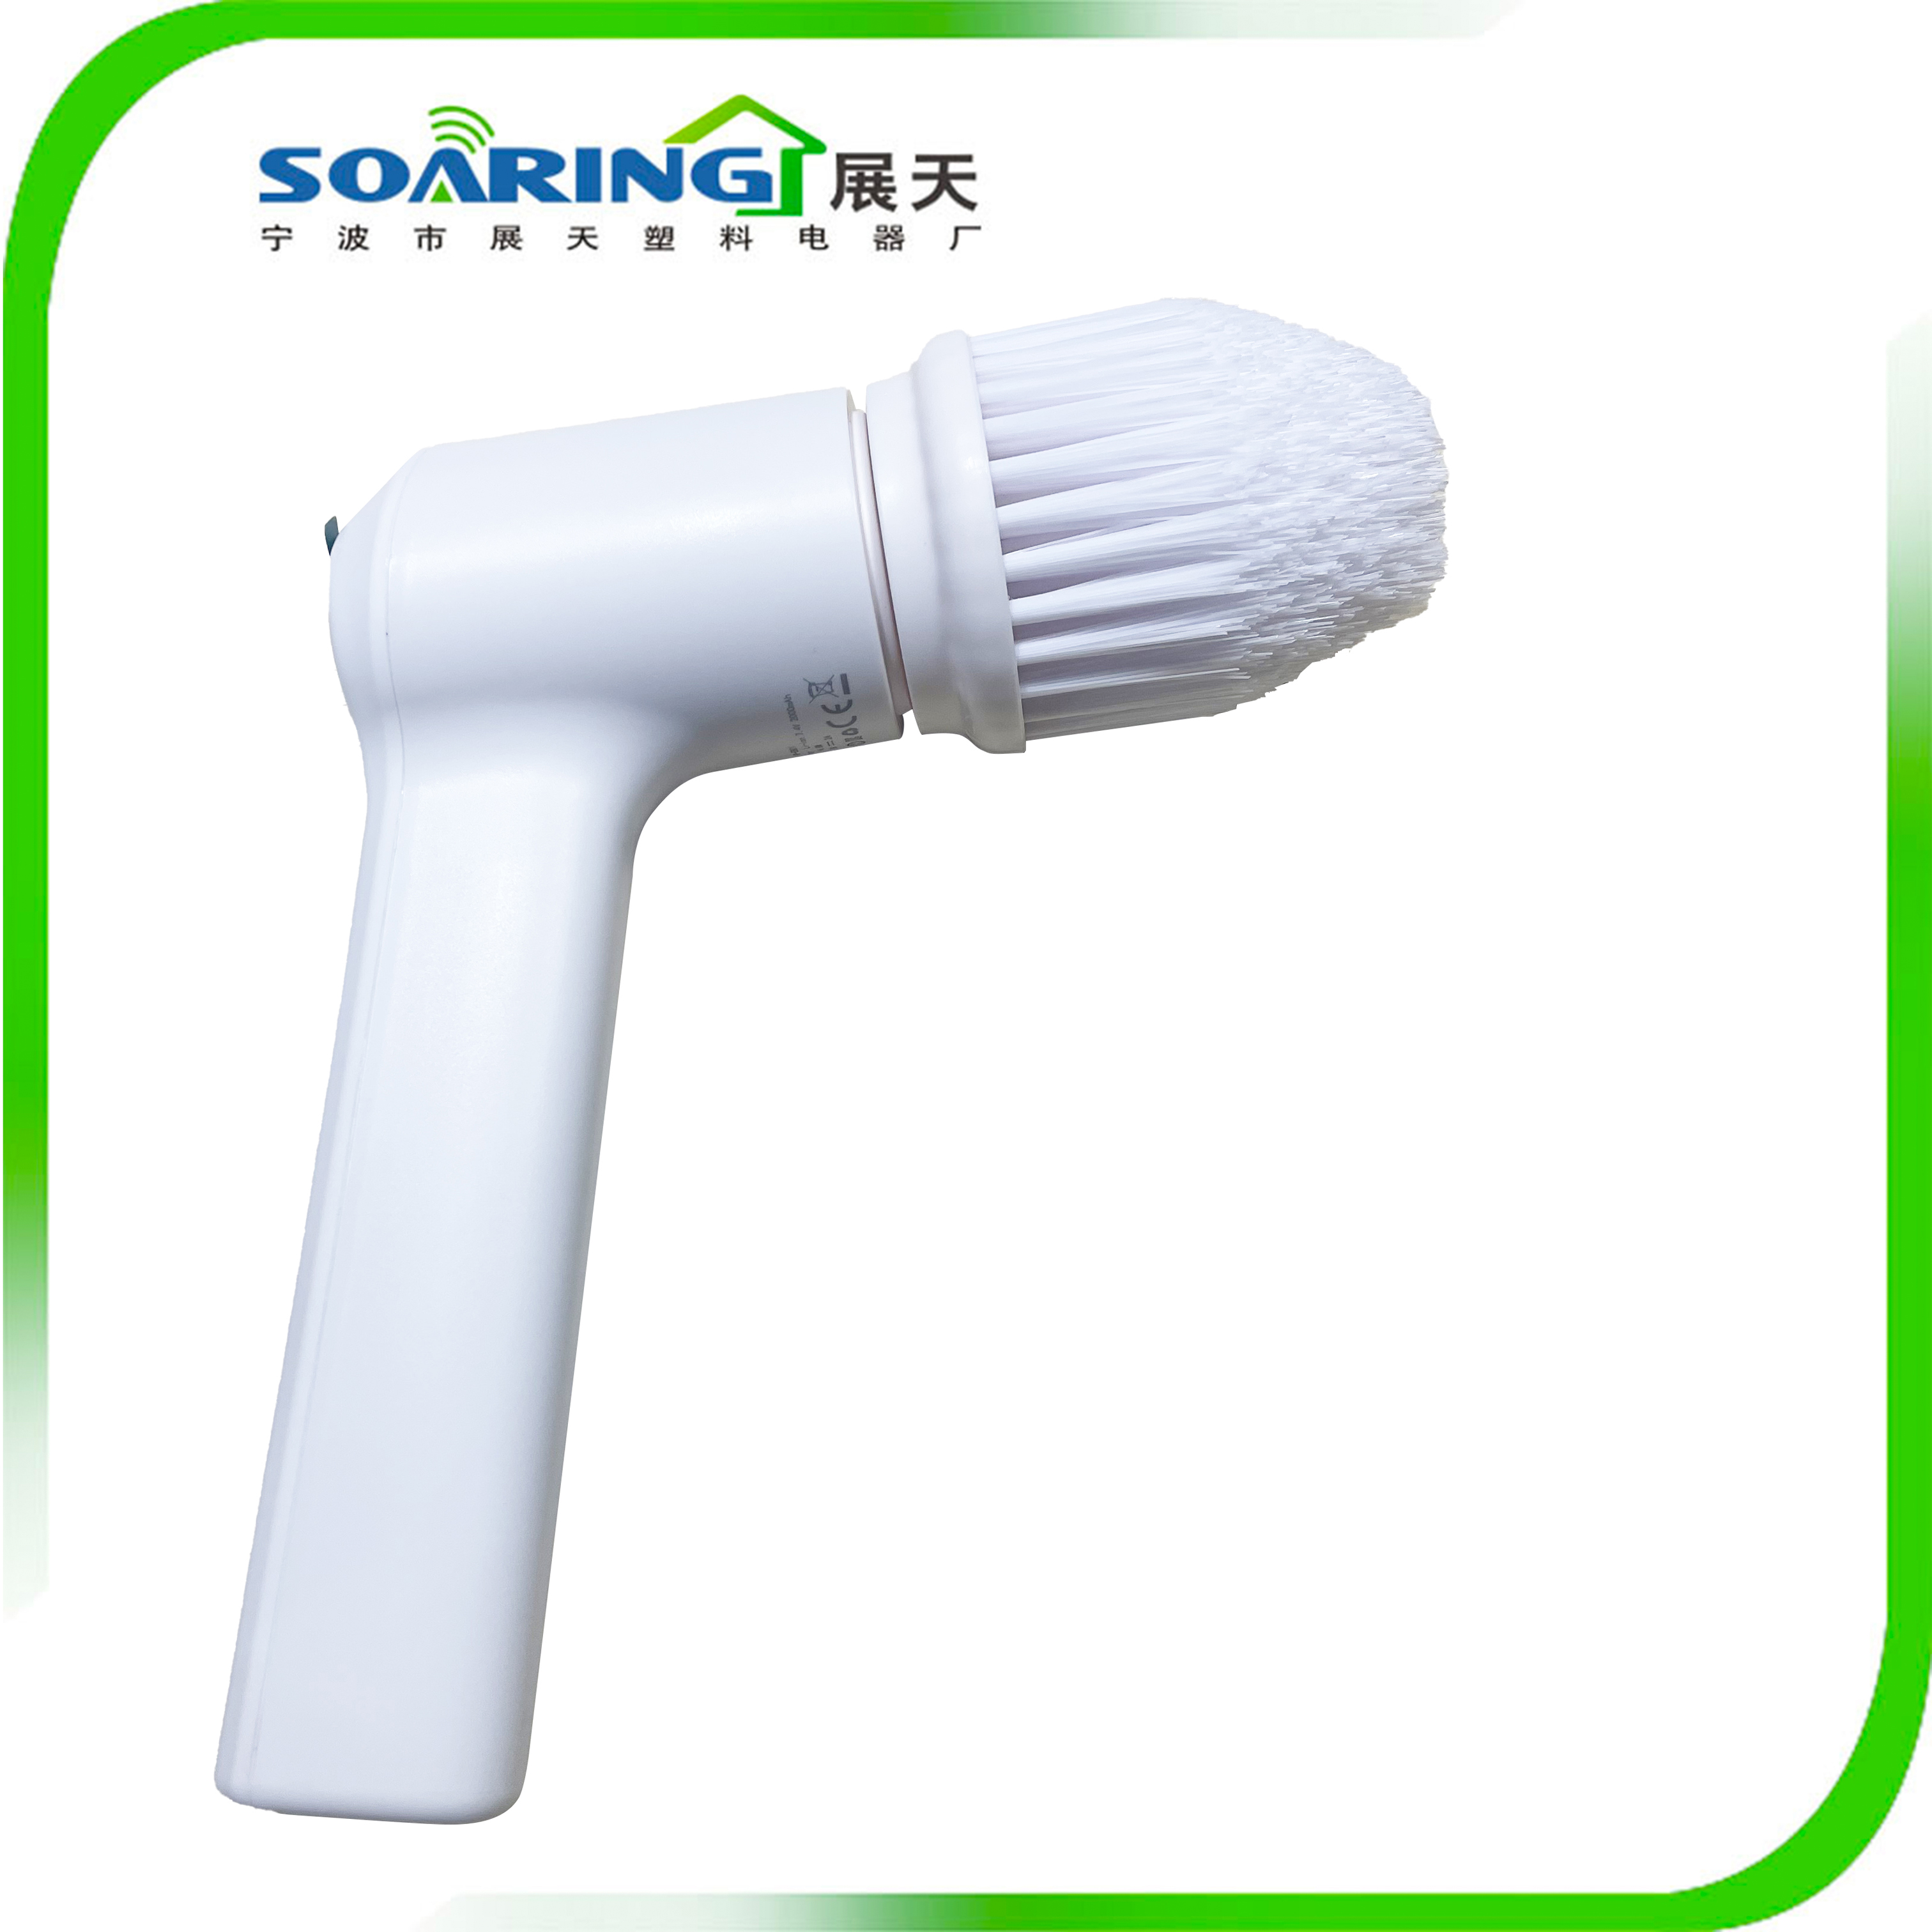 Electronic Hand-Held Spin Brush Household Sonic Clean Scrubber - 3 